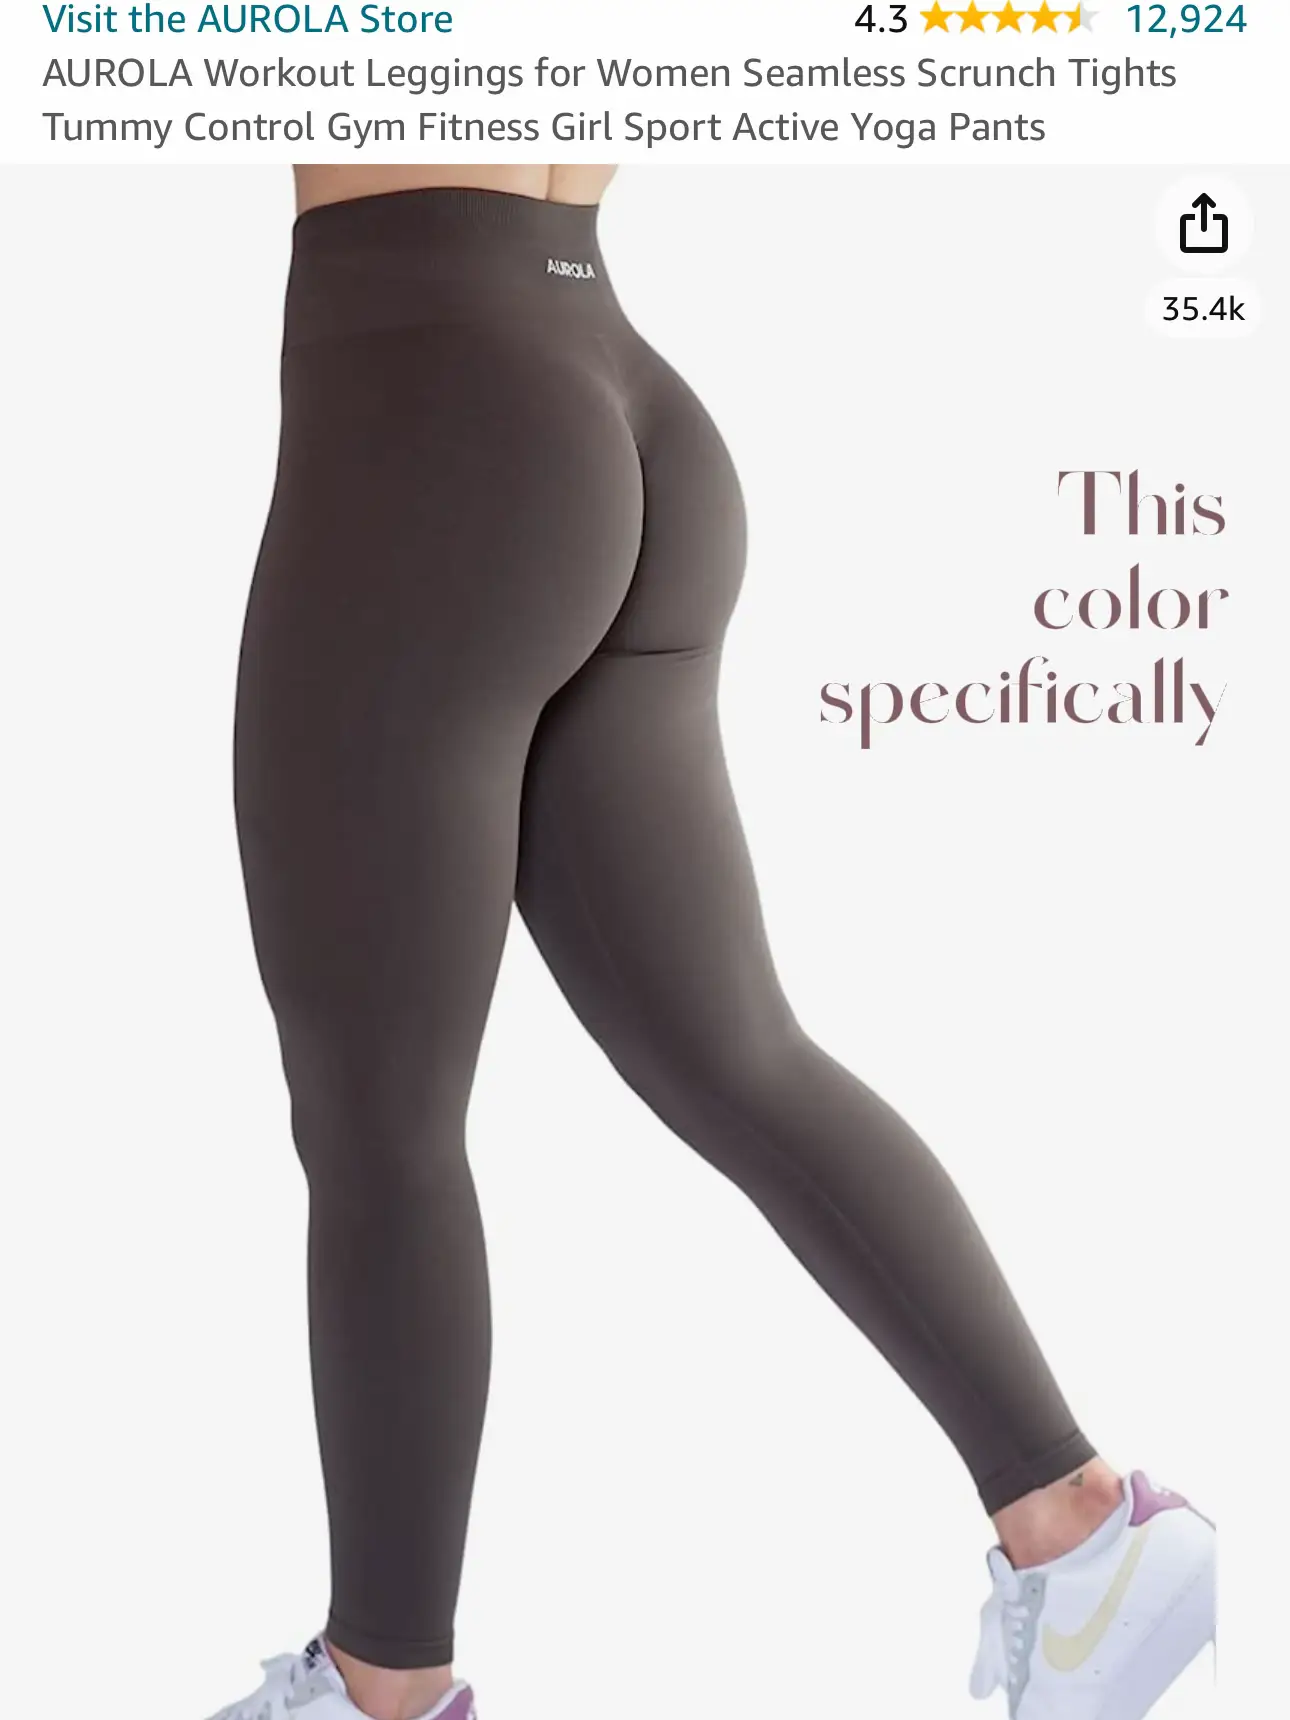 Workout Leggings for Women Seamless Scrunch Tights Tummy Control